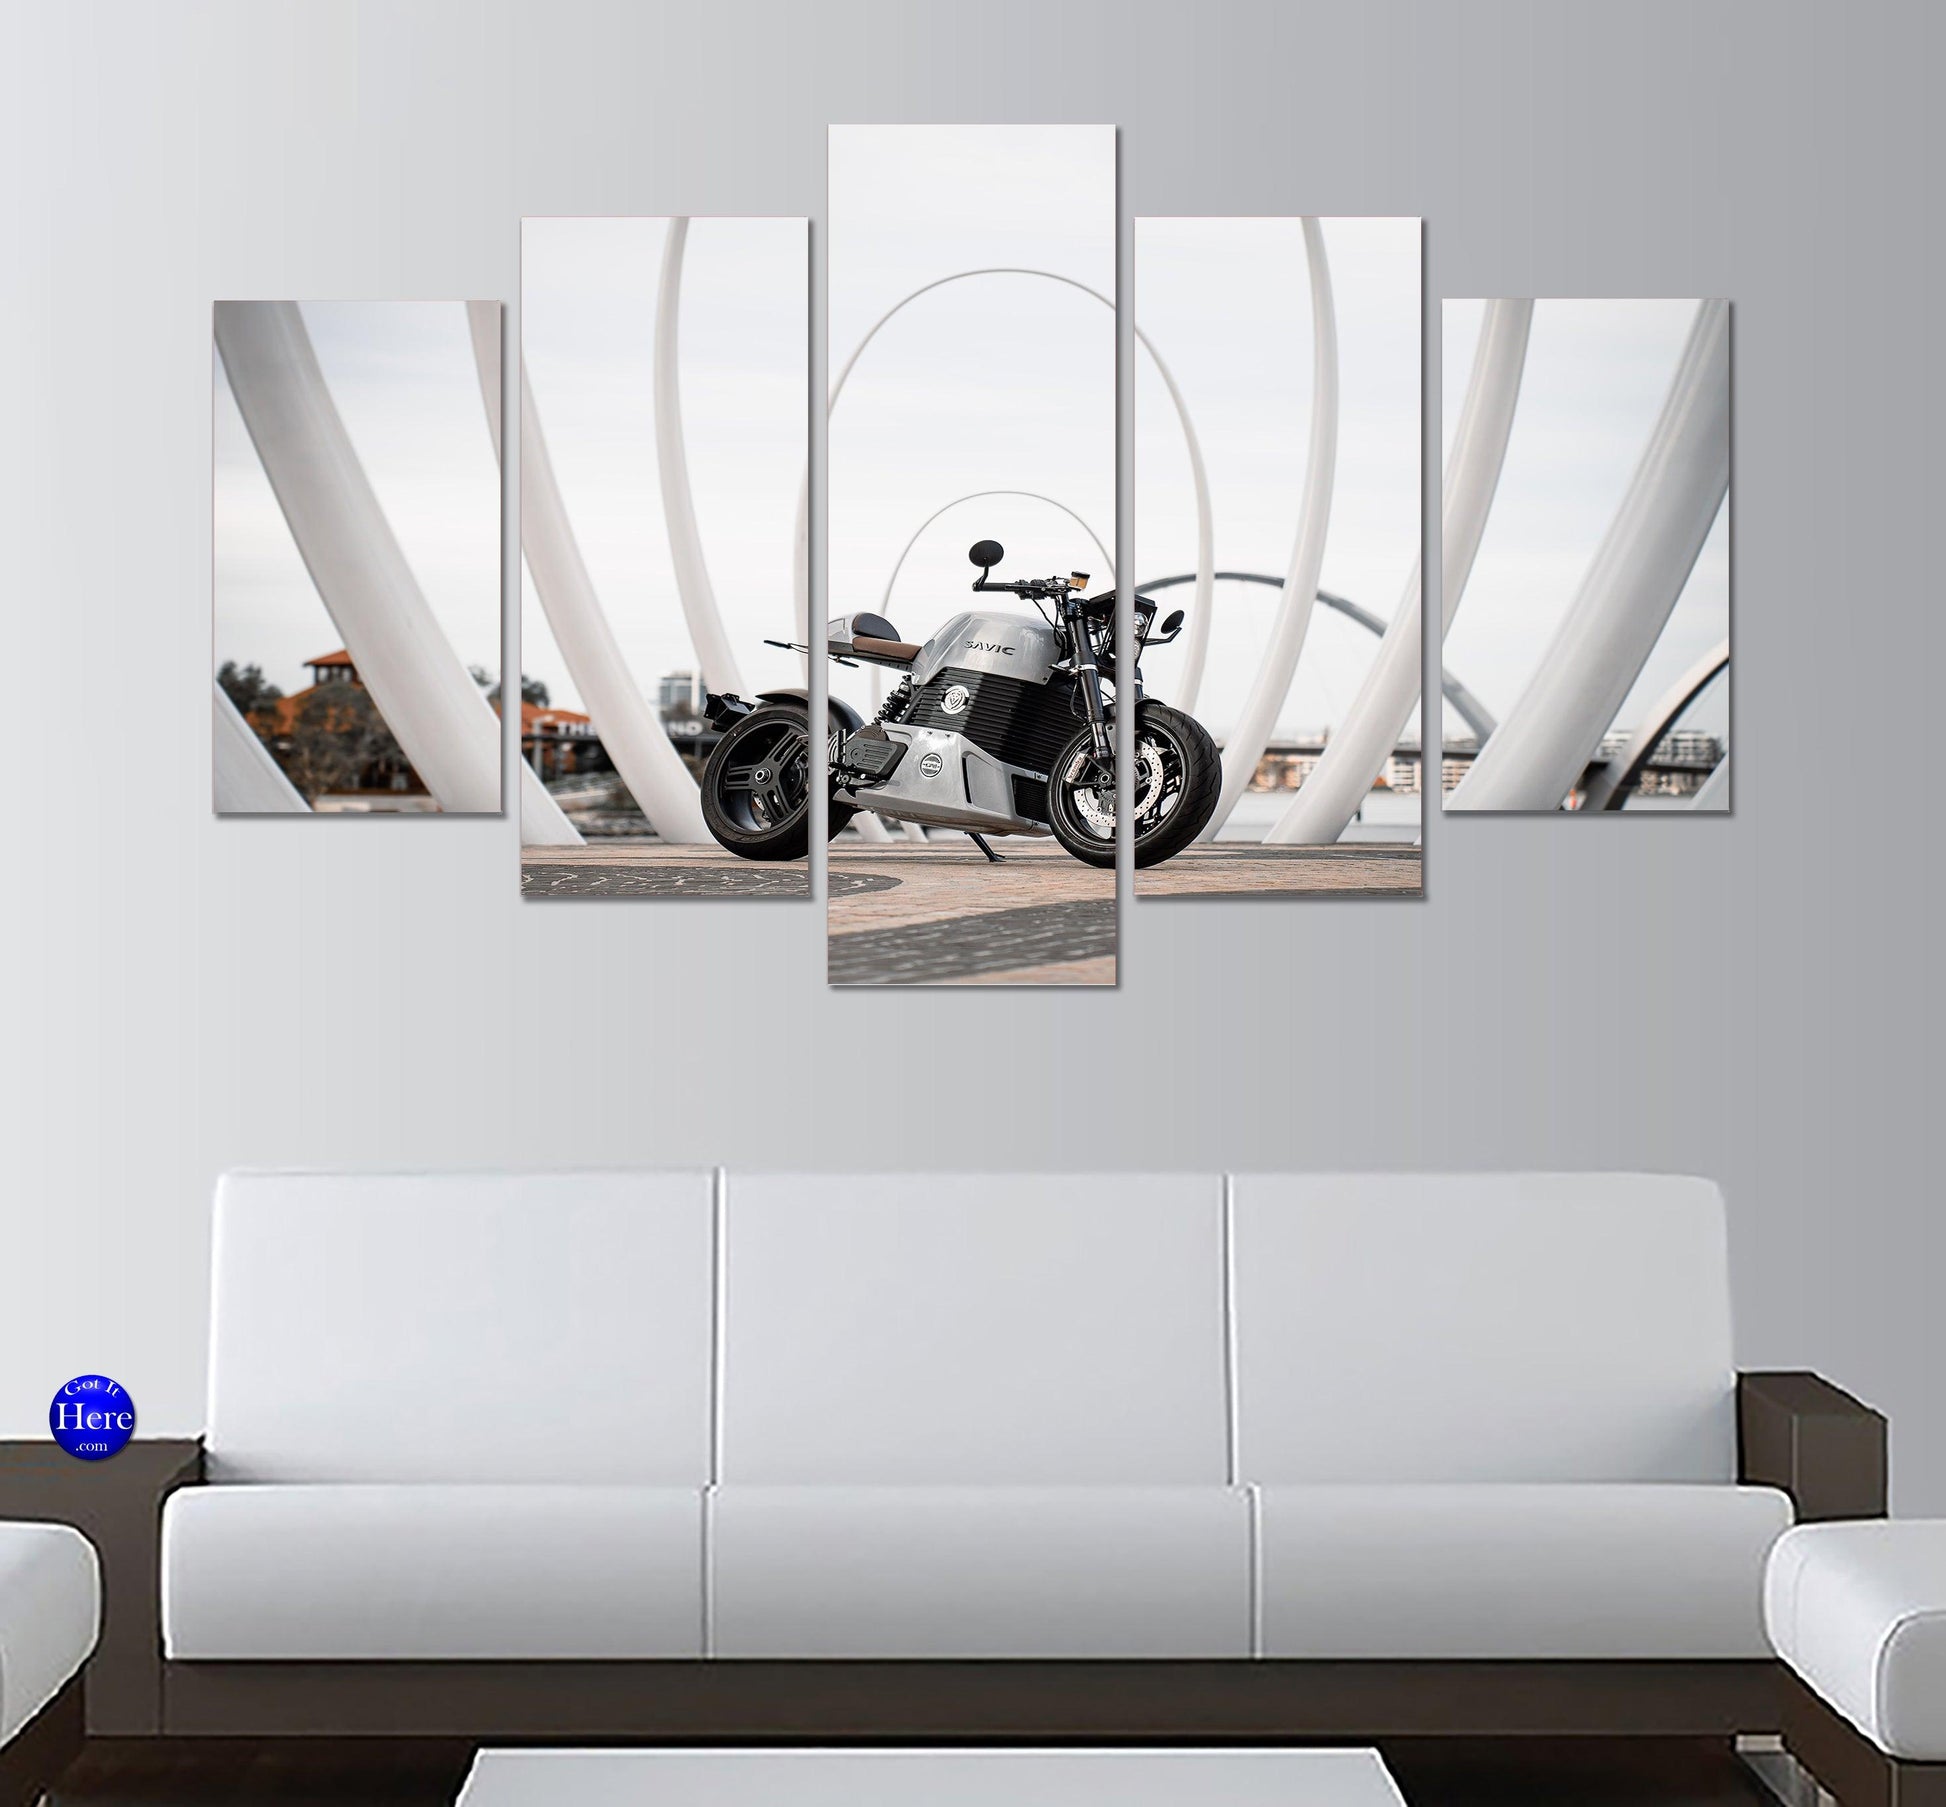 Savic Motorcycles C-Series High Performance Electric Motorcycle 5 Panel Canvas Print Wall Art - GotItHere.com